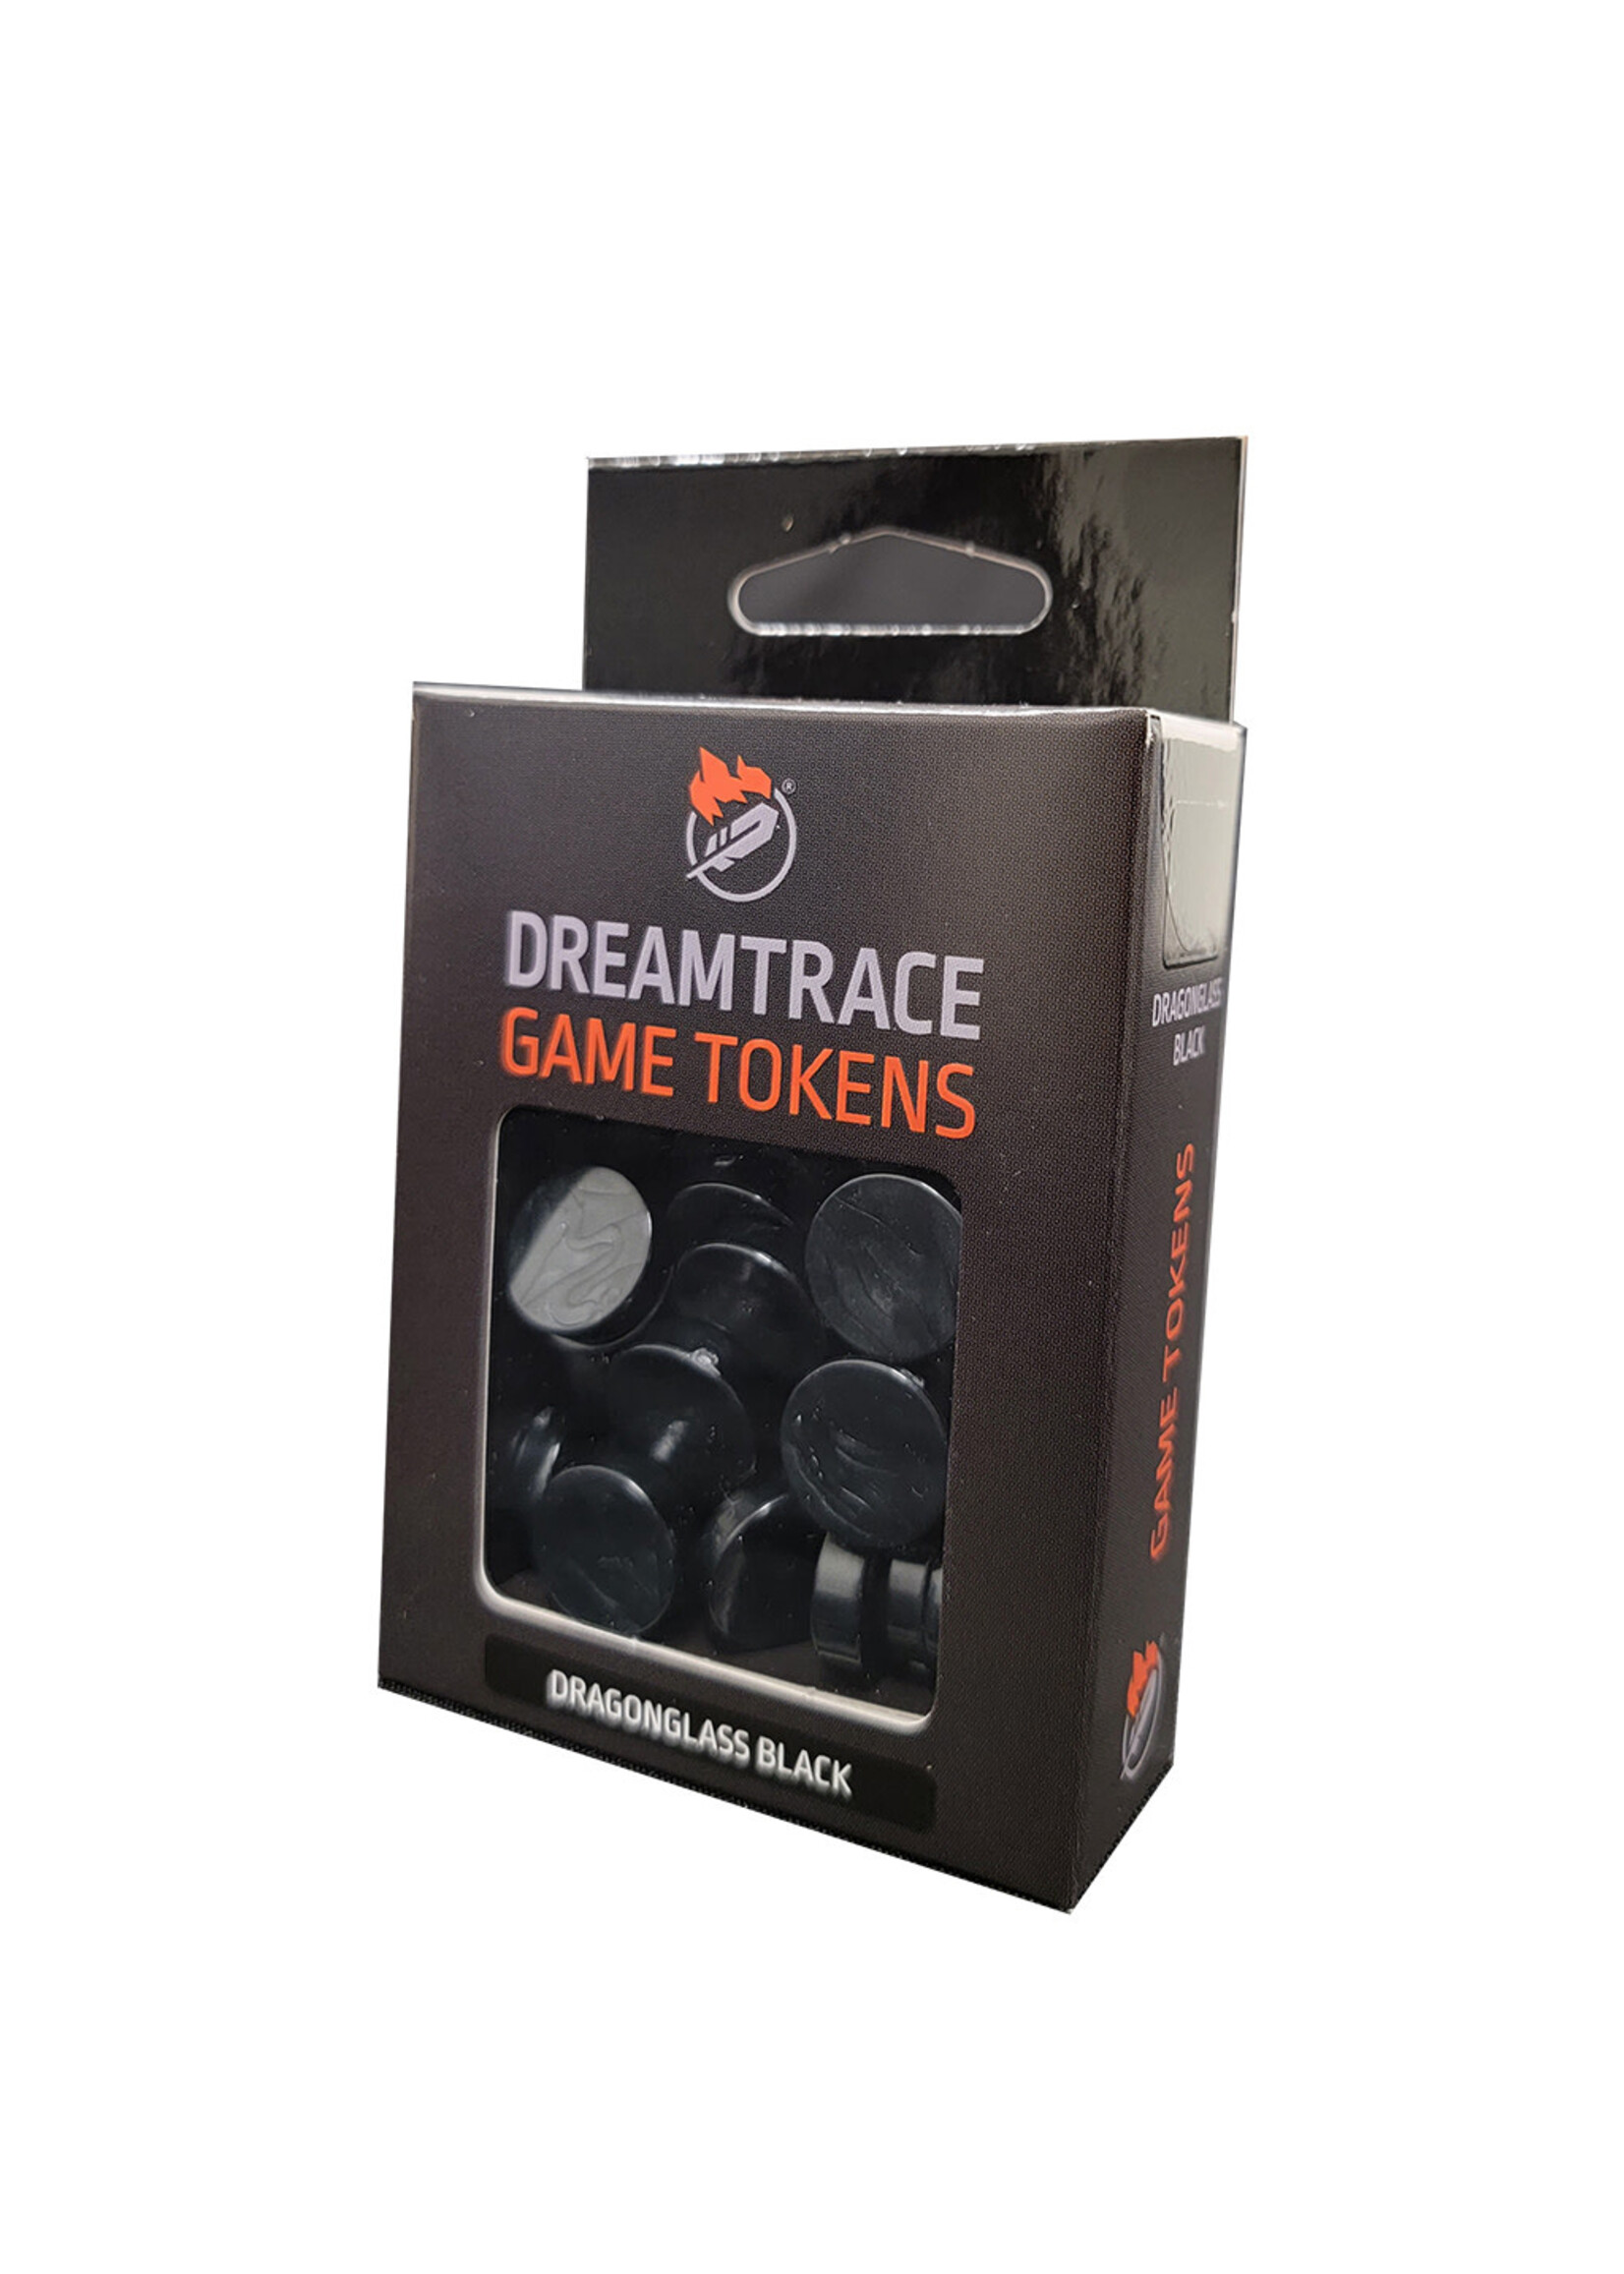 Ghost Galaxy DreamTrace Gaming Tokens: Dragonglass Black